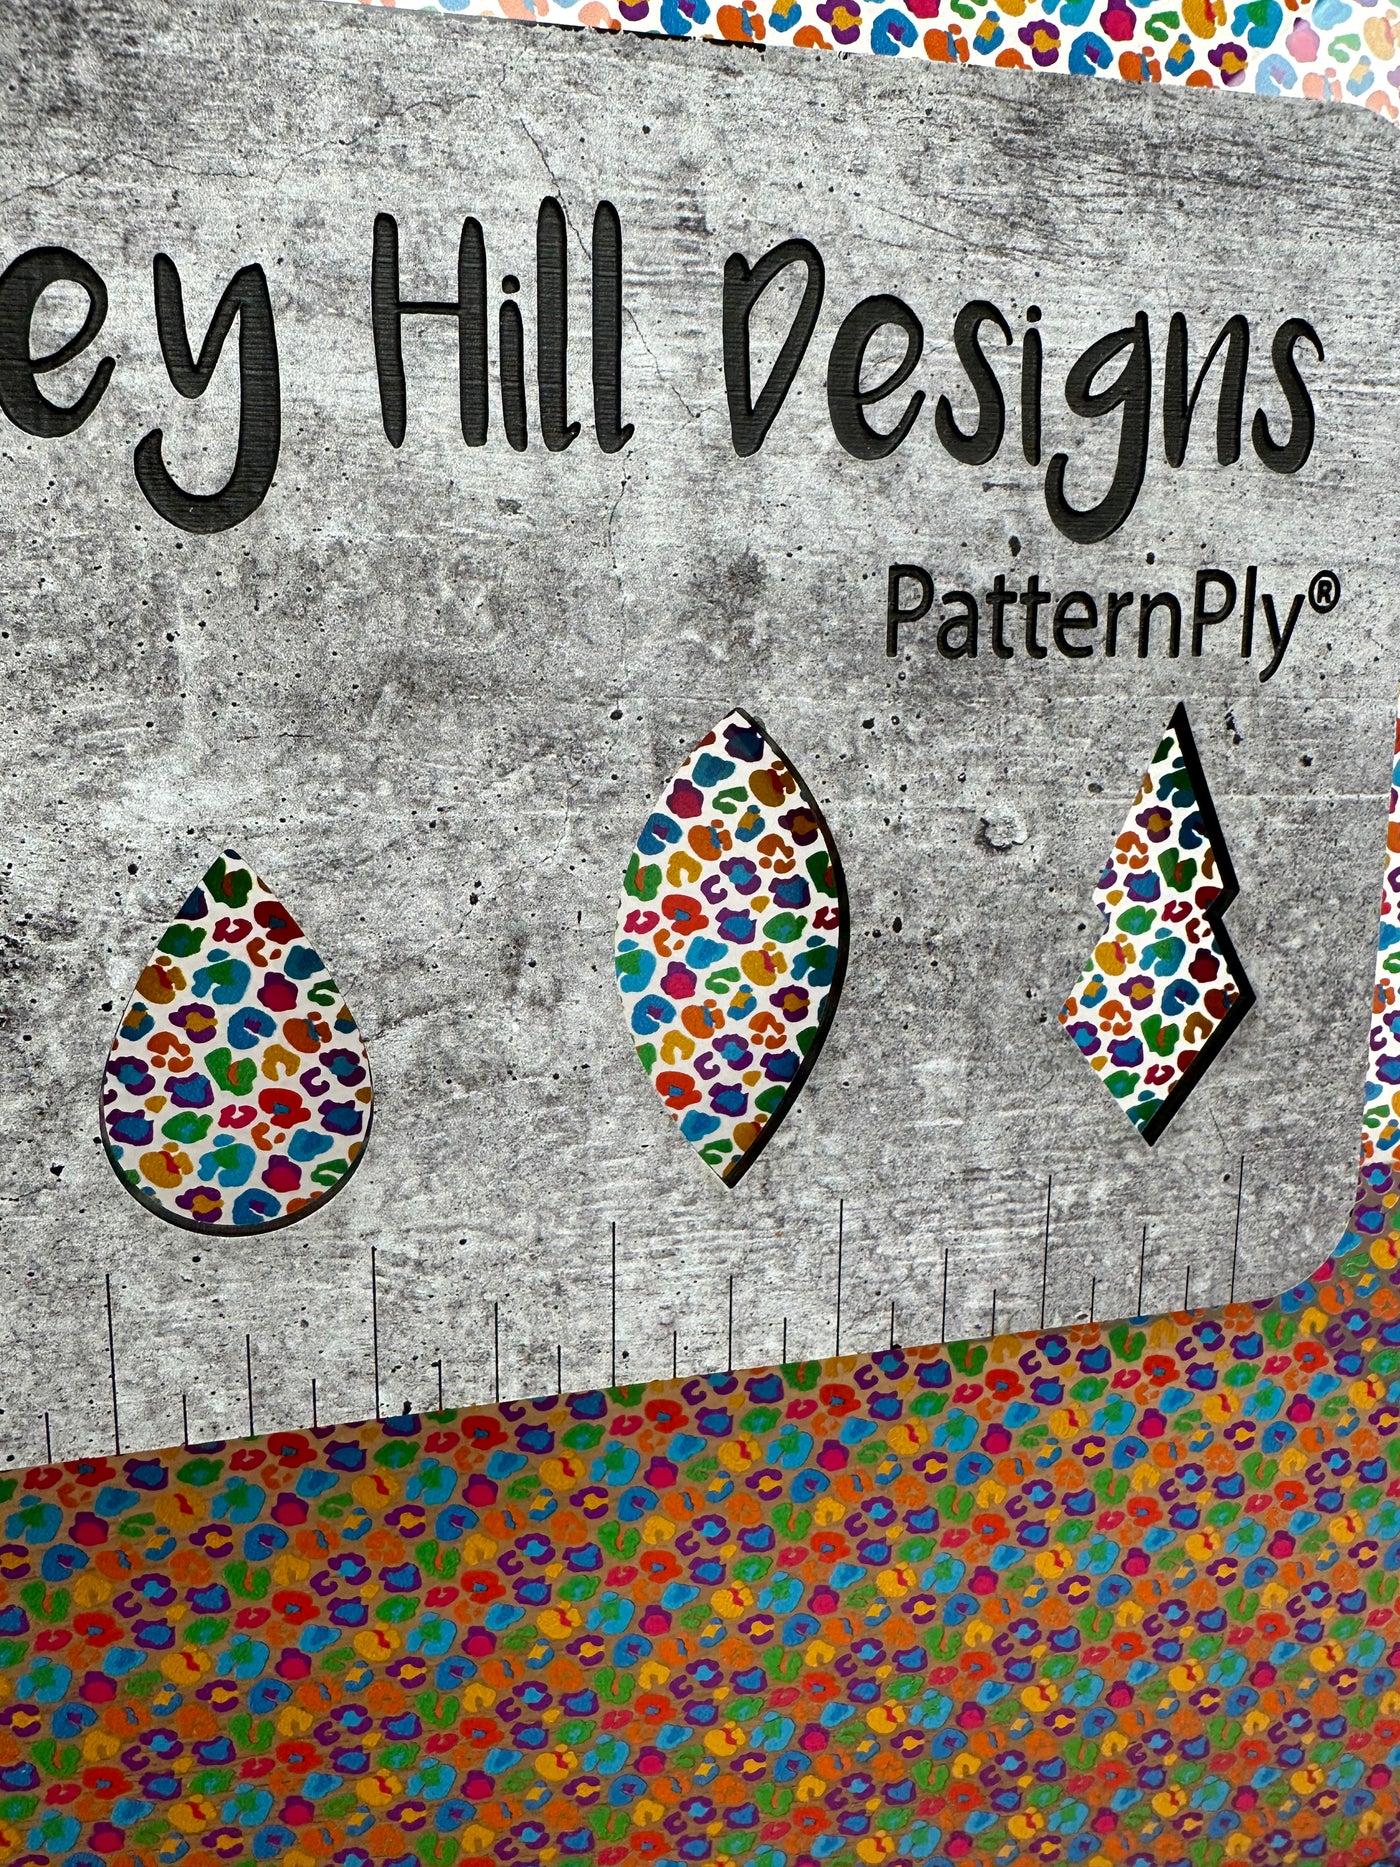 PatternPly® Scattered Colorful Leopard Spots